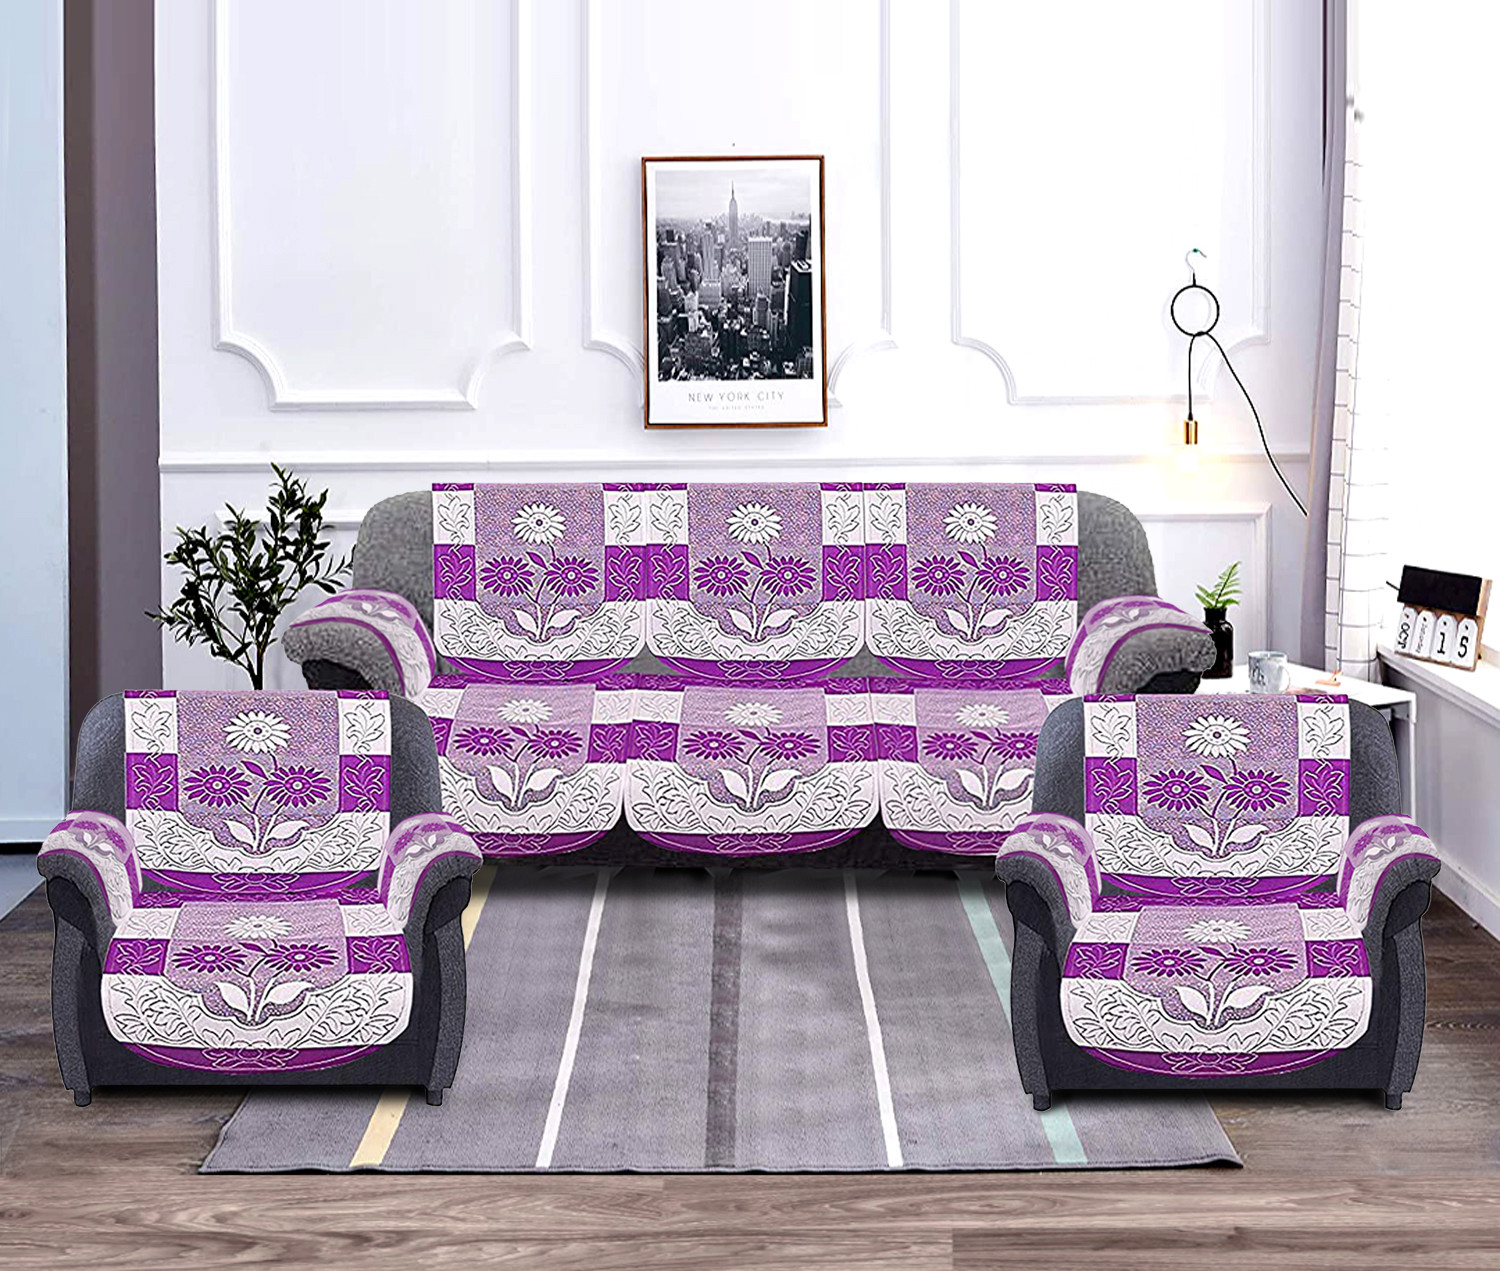 Kuber Industries Flower Design Cotton 5 Seater Sofa Cover With 6 Pieces Arms cover Use Both Side, Living Room, Drawing Room, Bedroom, Guest Room (Set Of16, Purple)-KUBMRT11967